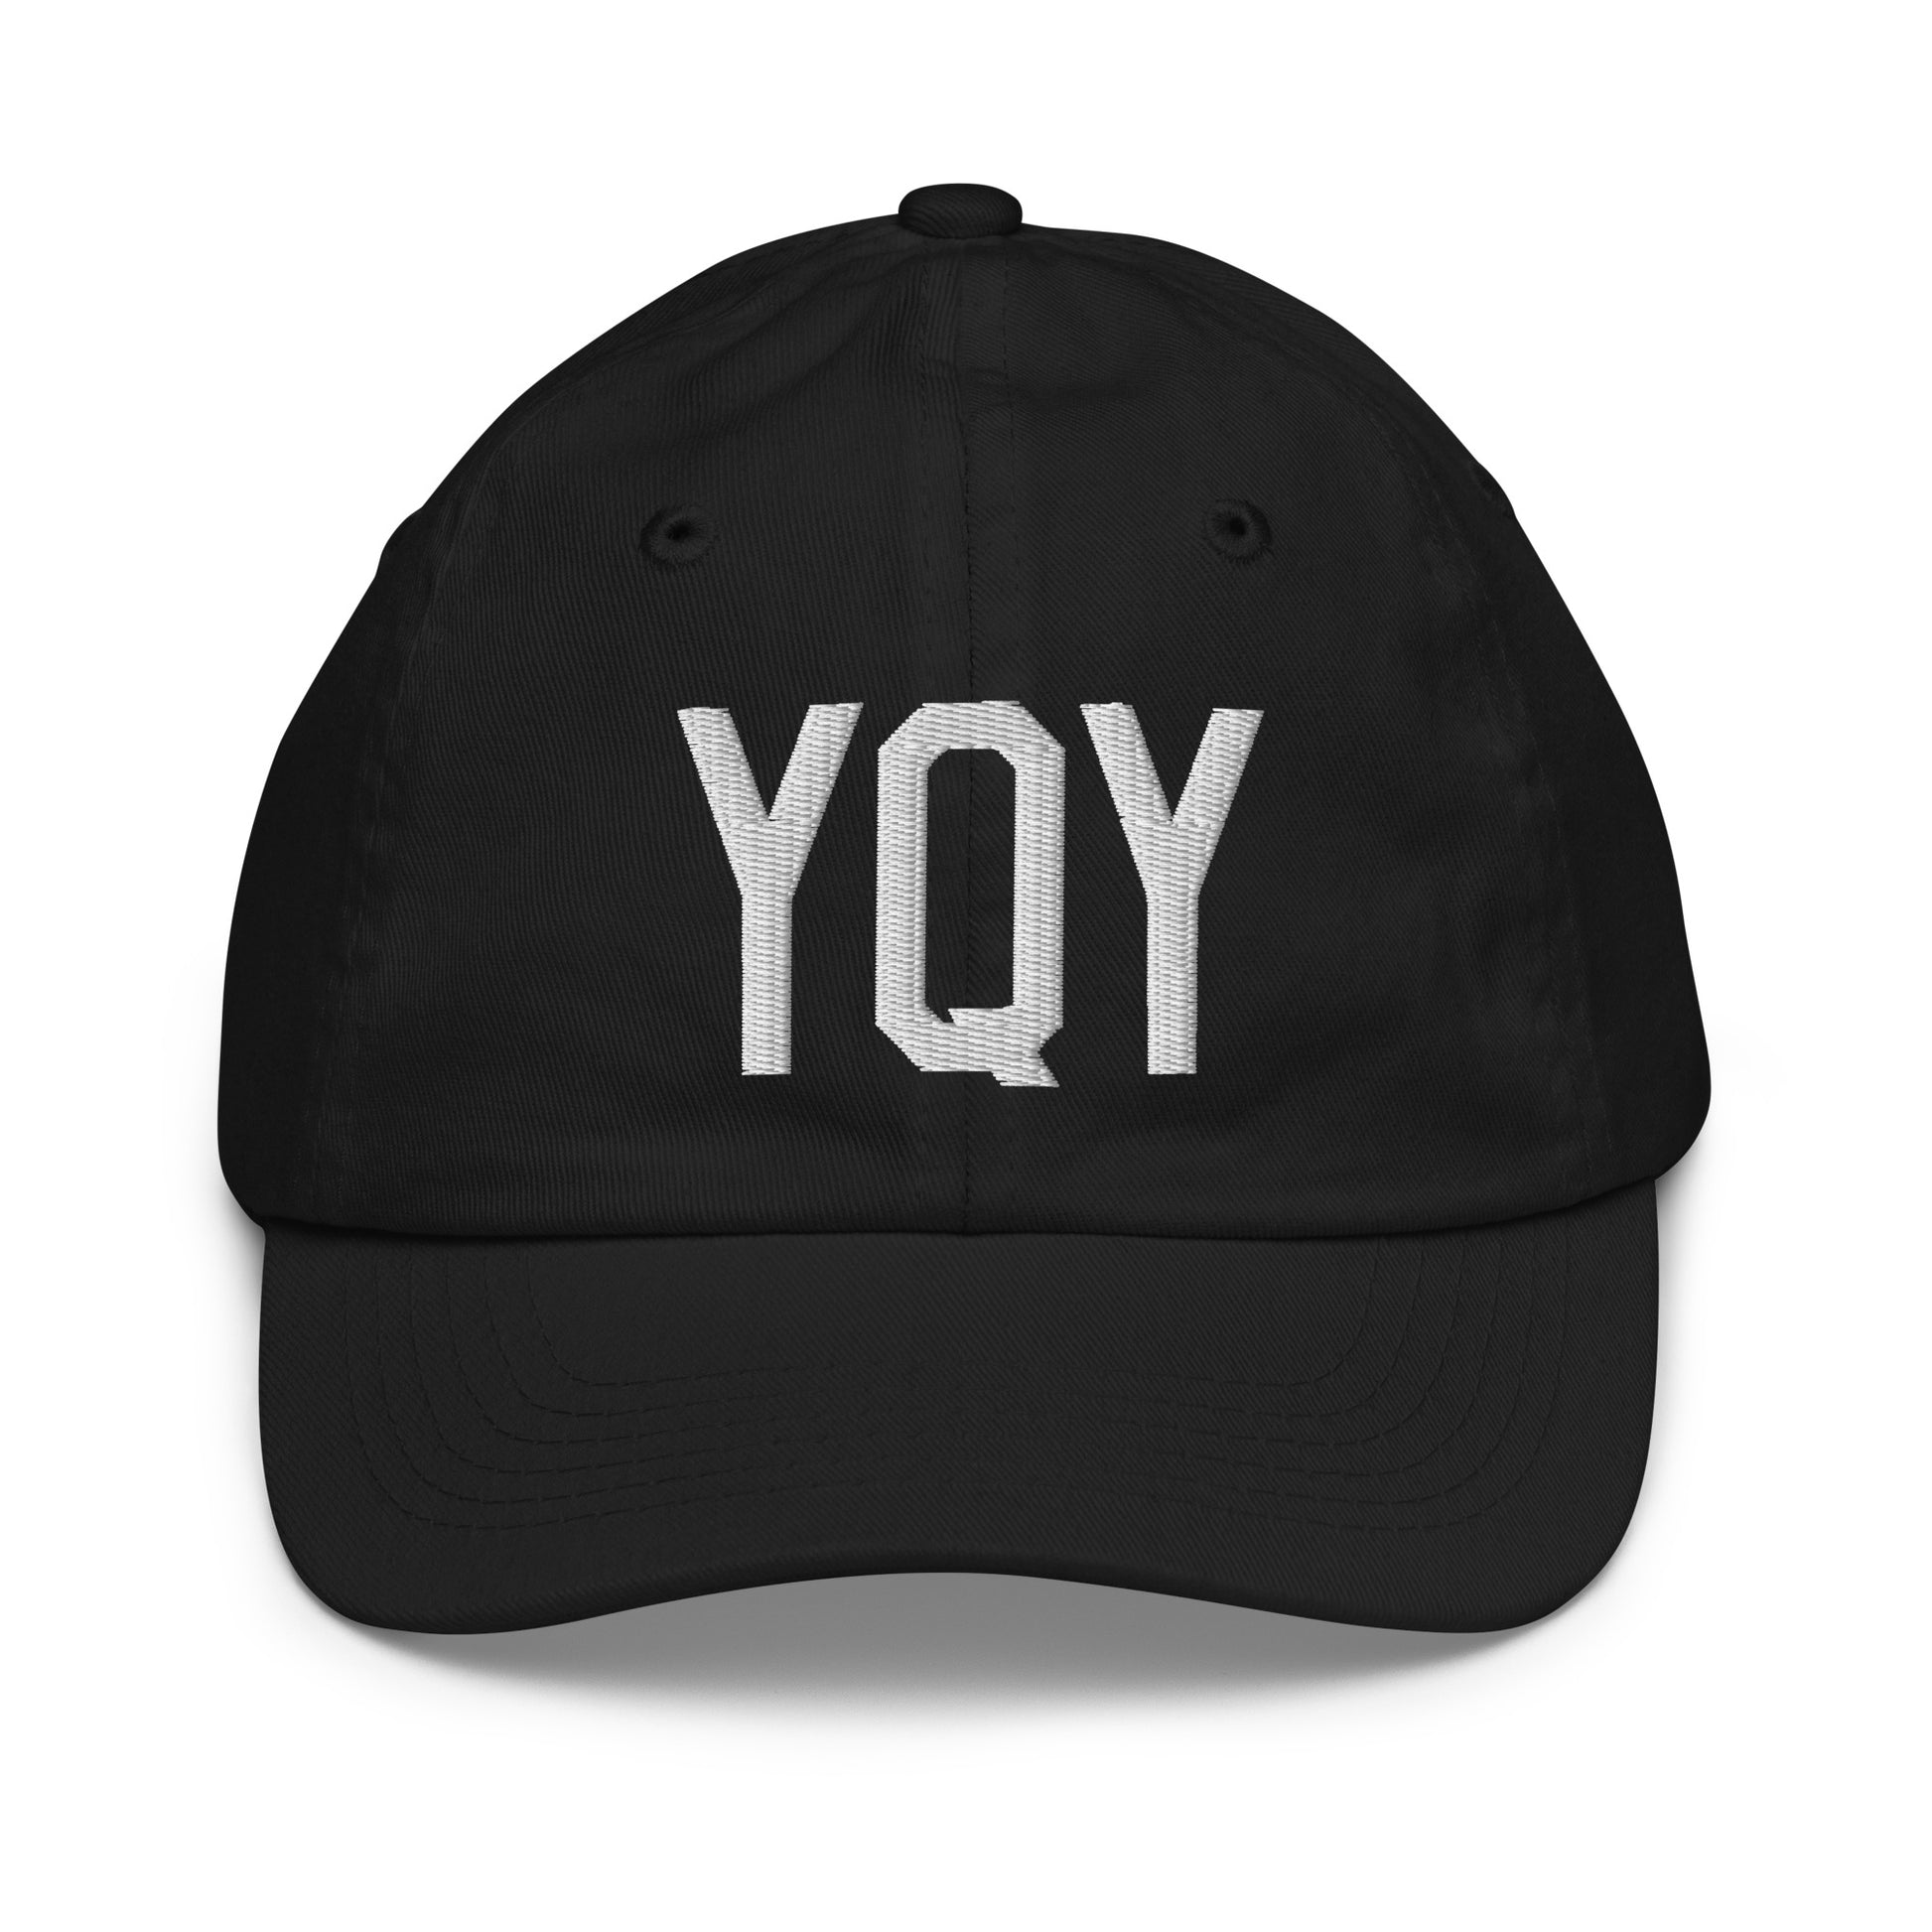 Airport Code Kid's Baseball Cap - White • YQY Sydney • YHM Designs - Image 11